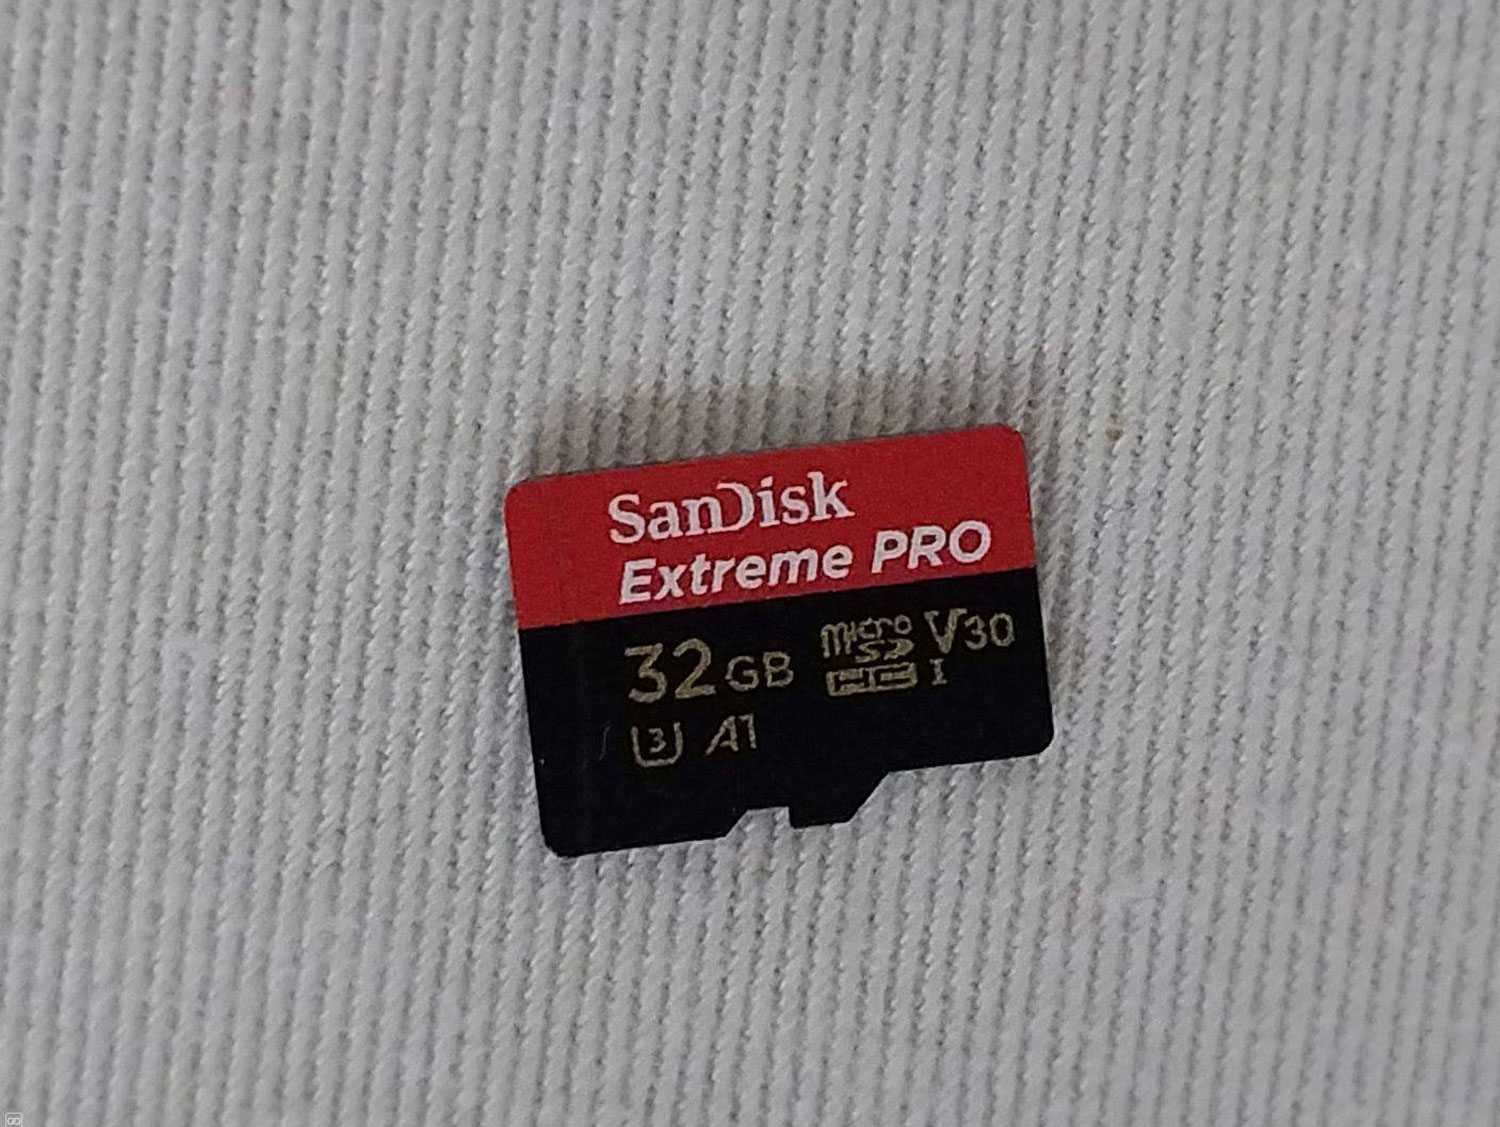 Extreme Pro 32GB Memory Card Front View - Ideal for High-Quality Media Storage